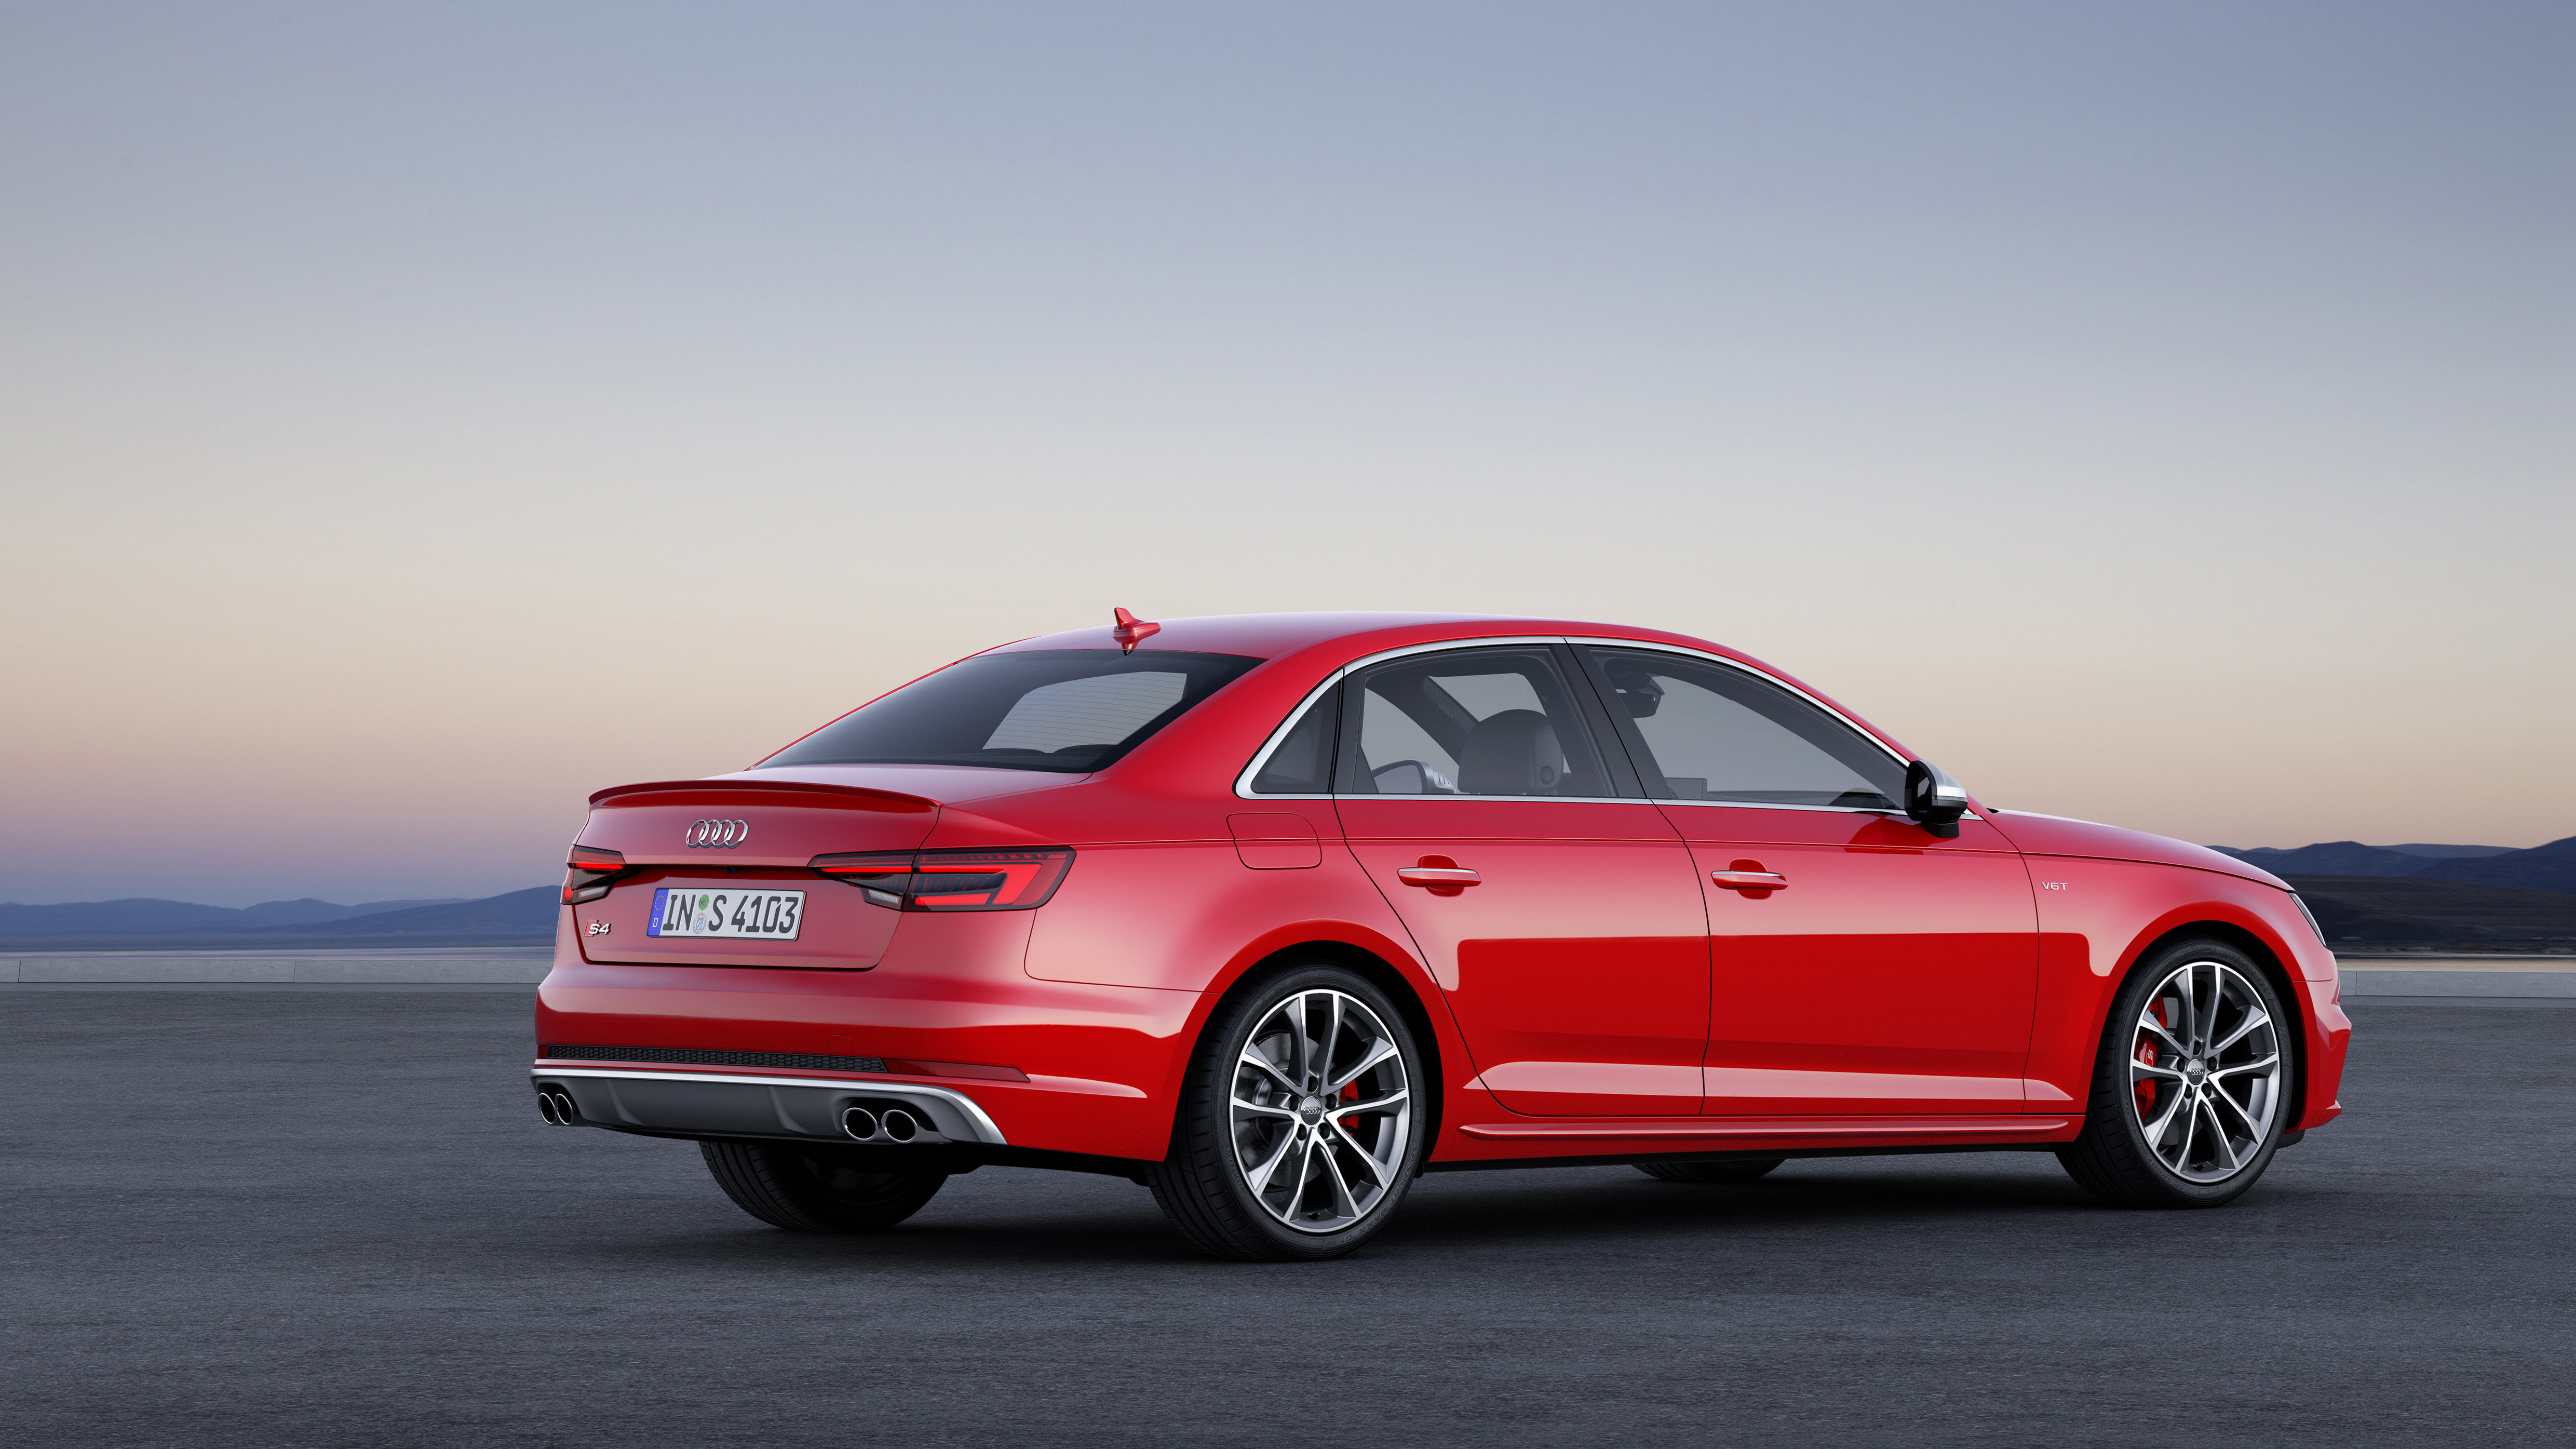 From 0 to 100 real quick: The high-performance Audi S4 is here